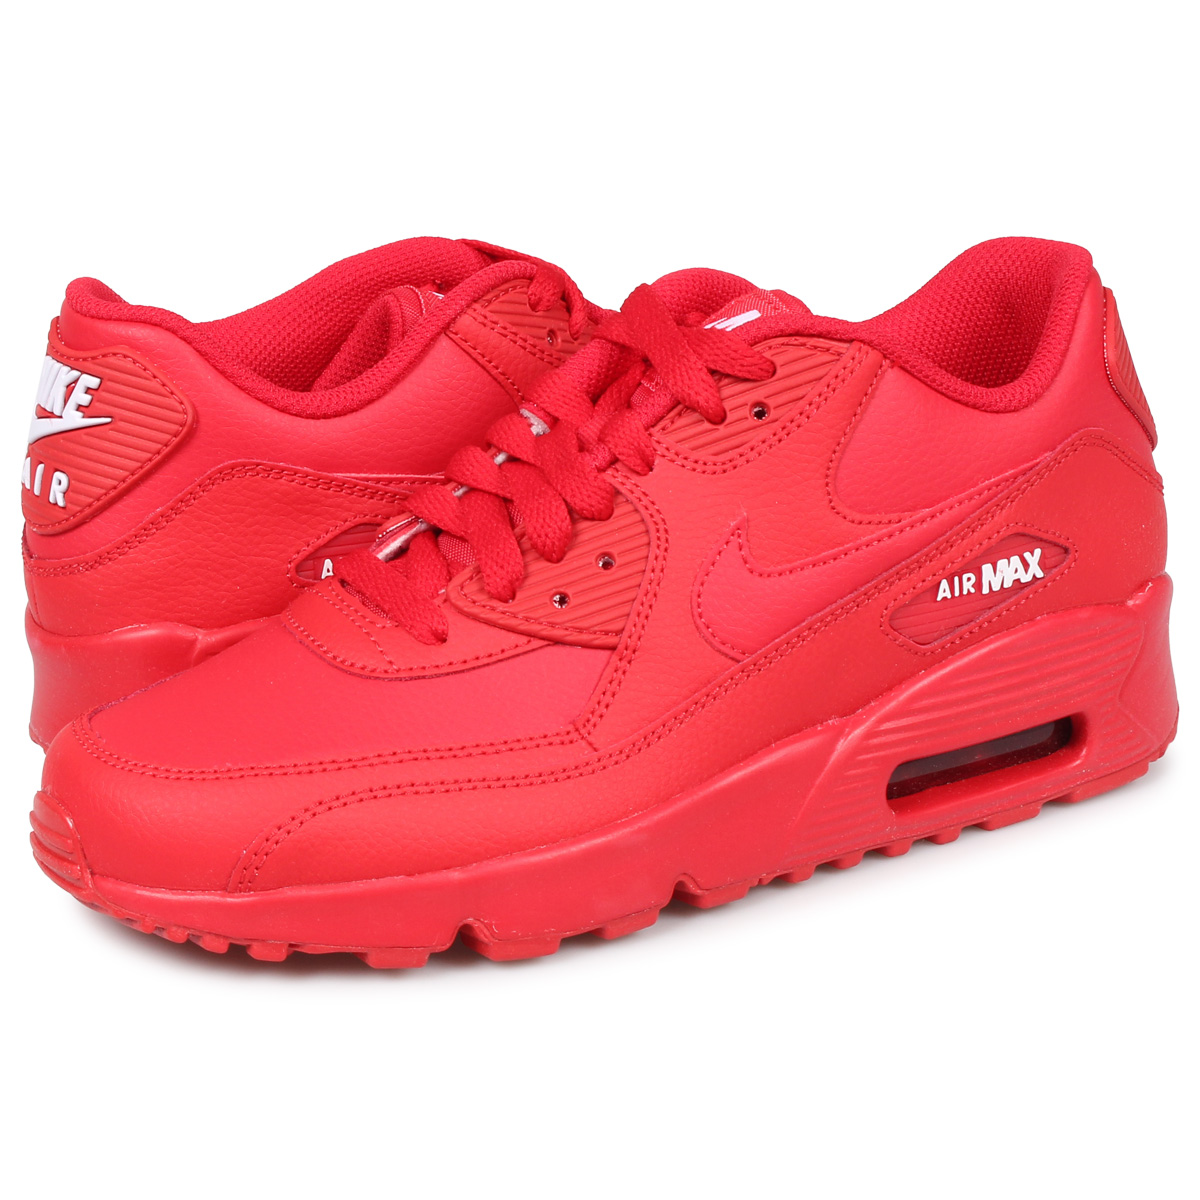 air max 90 leather red Online Shopping -